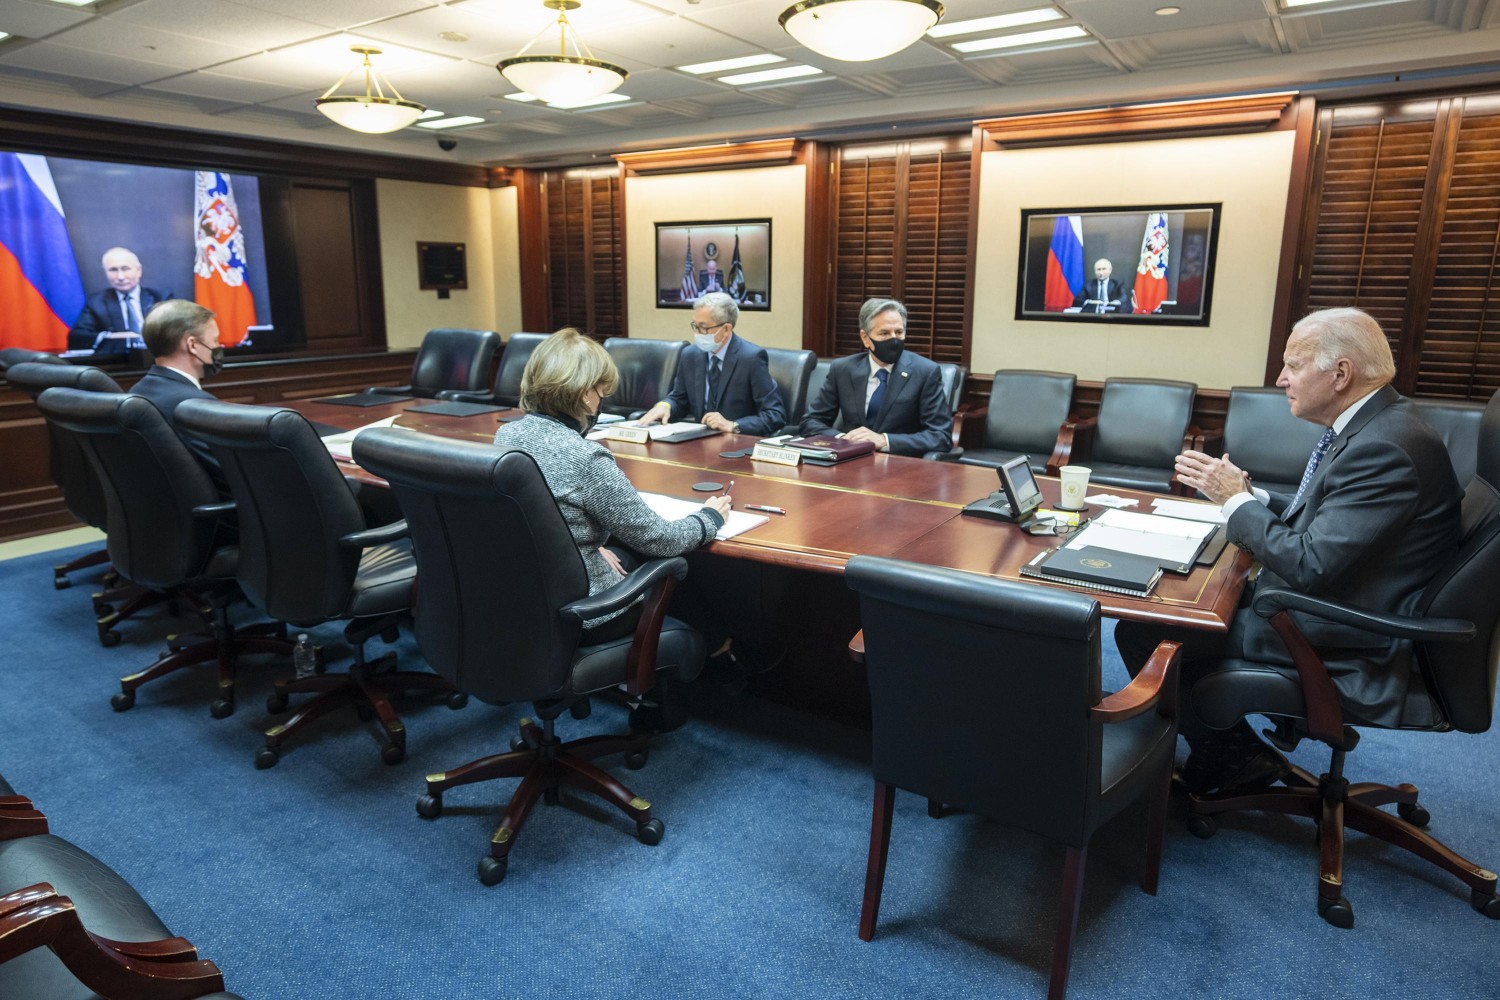 In this image provided by The White House, President Joe Biden speaks as he meets virtually via a secure video conference with Russian President Vladimir Putin from the Situation Room at the White House in Washington, Tuesday, Dec. 7, 2021. At far left is White House national security adviser Jake Sullivan along with Secretary of State Antony Blinken, right, national security council senior director for Russian and Central Asia, Eric Green. (Adam Schultz/The White House via AP)